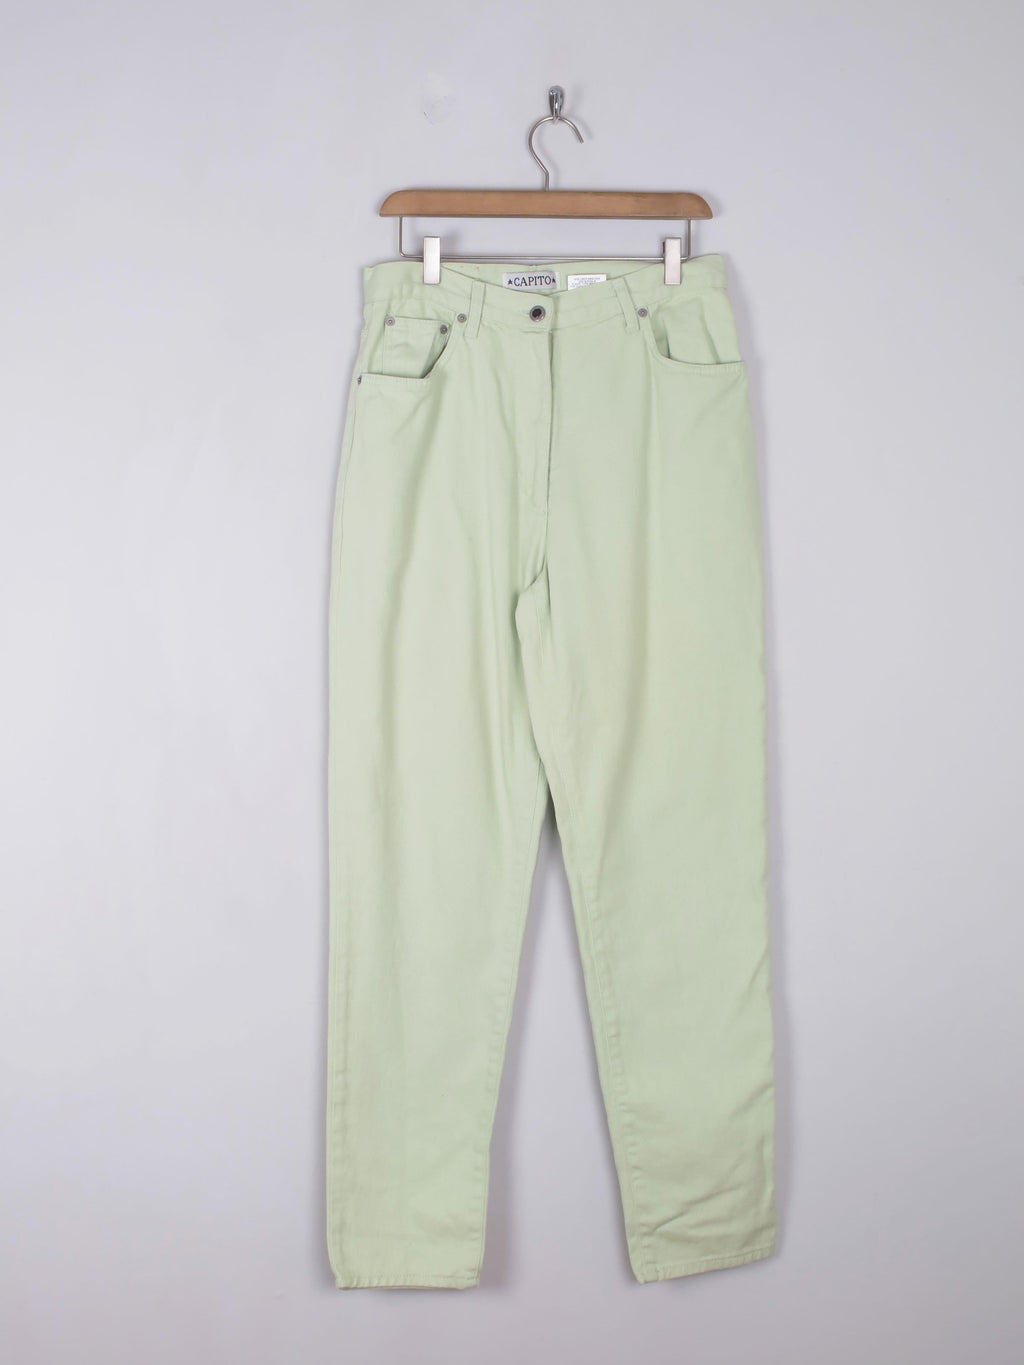 Women's Vintage Green Trousers 31" - The Harlequin